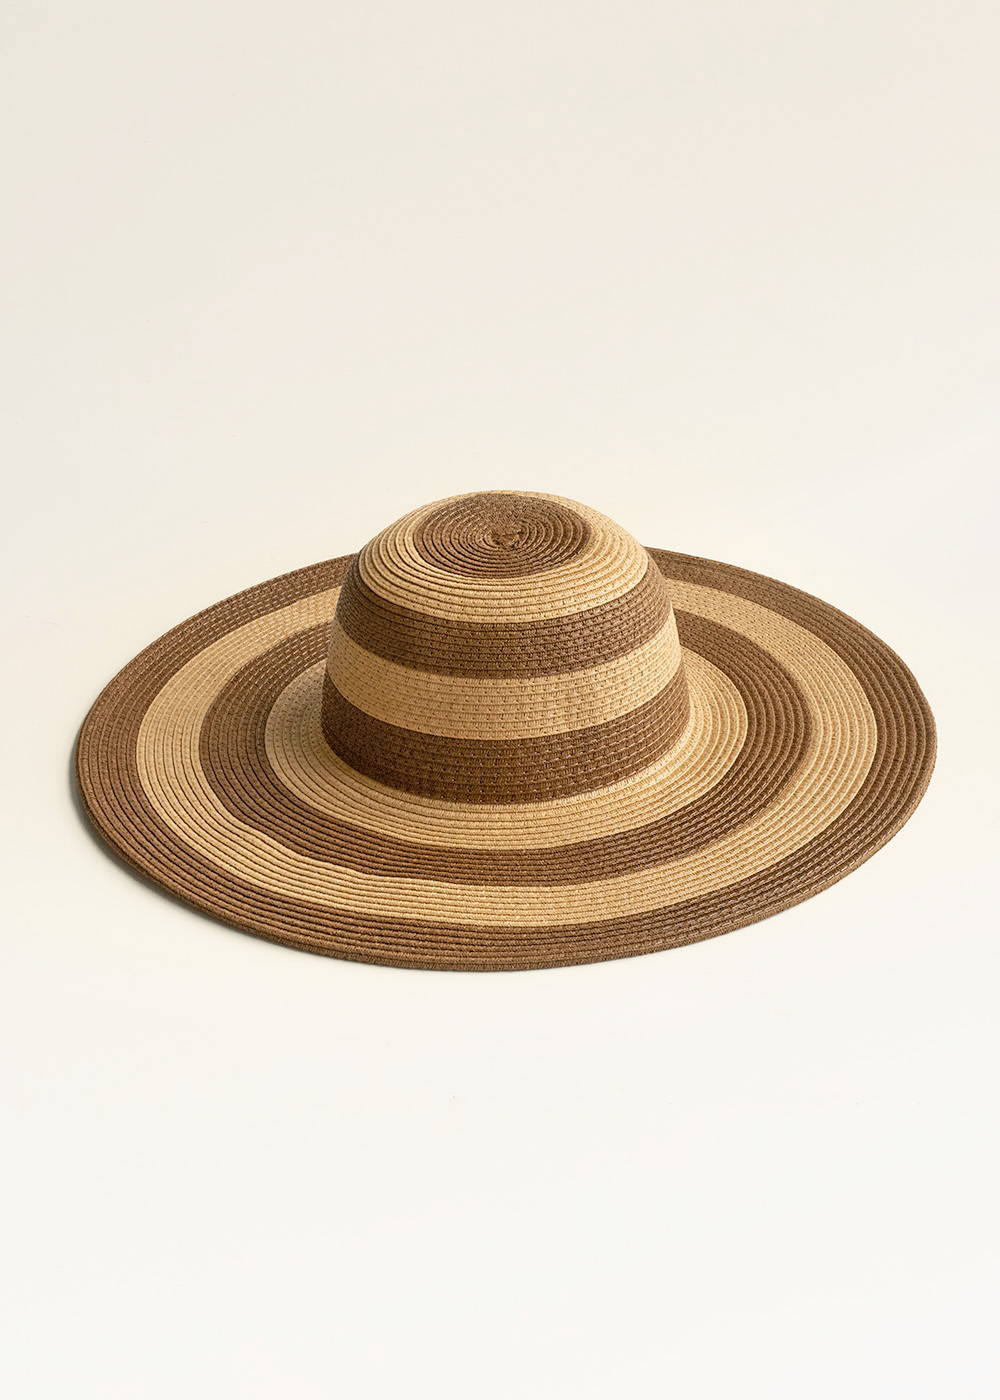 A wide brimmed sun hate with alternating brown and beige stripes